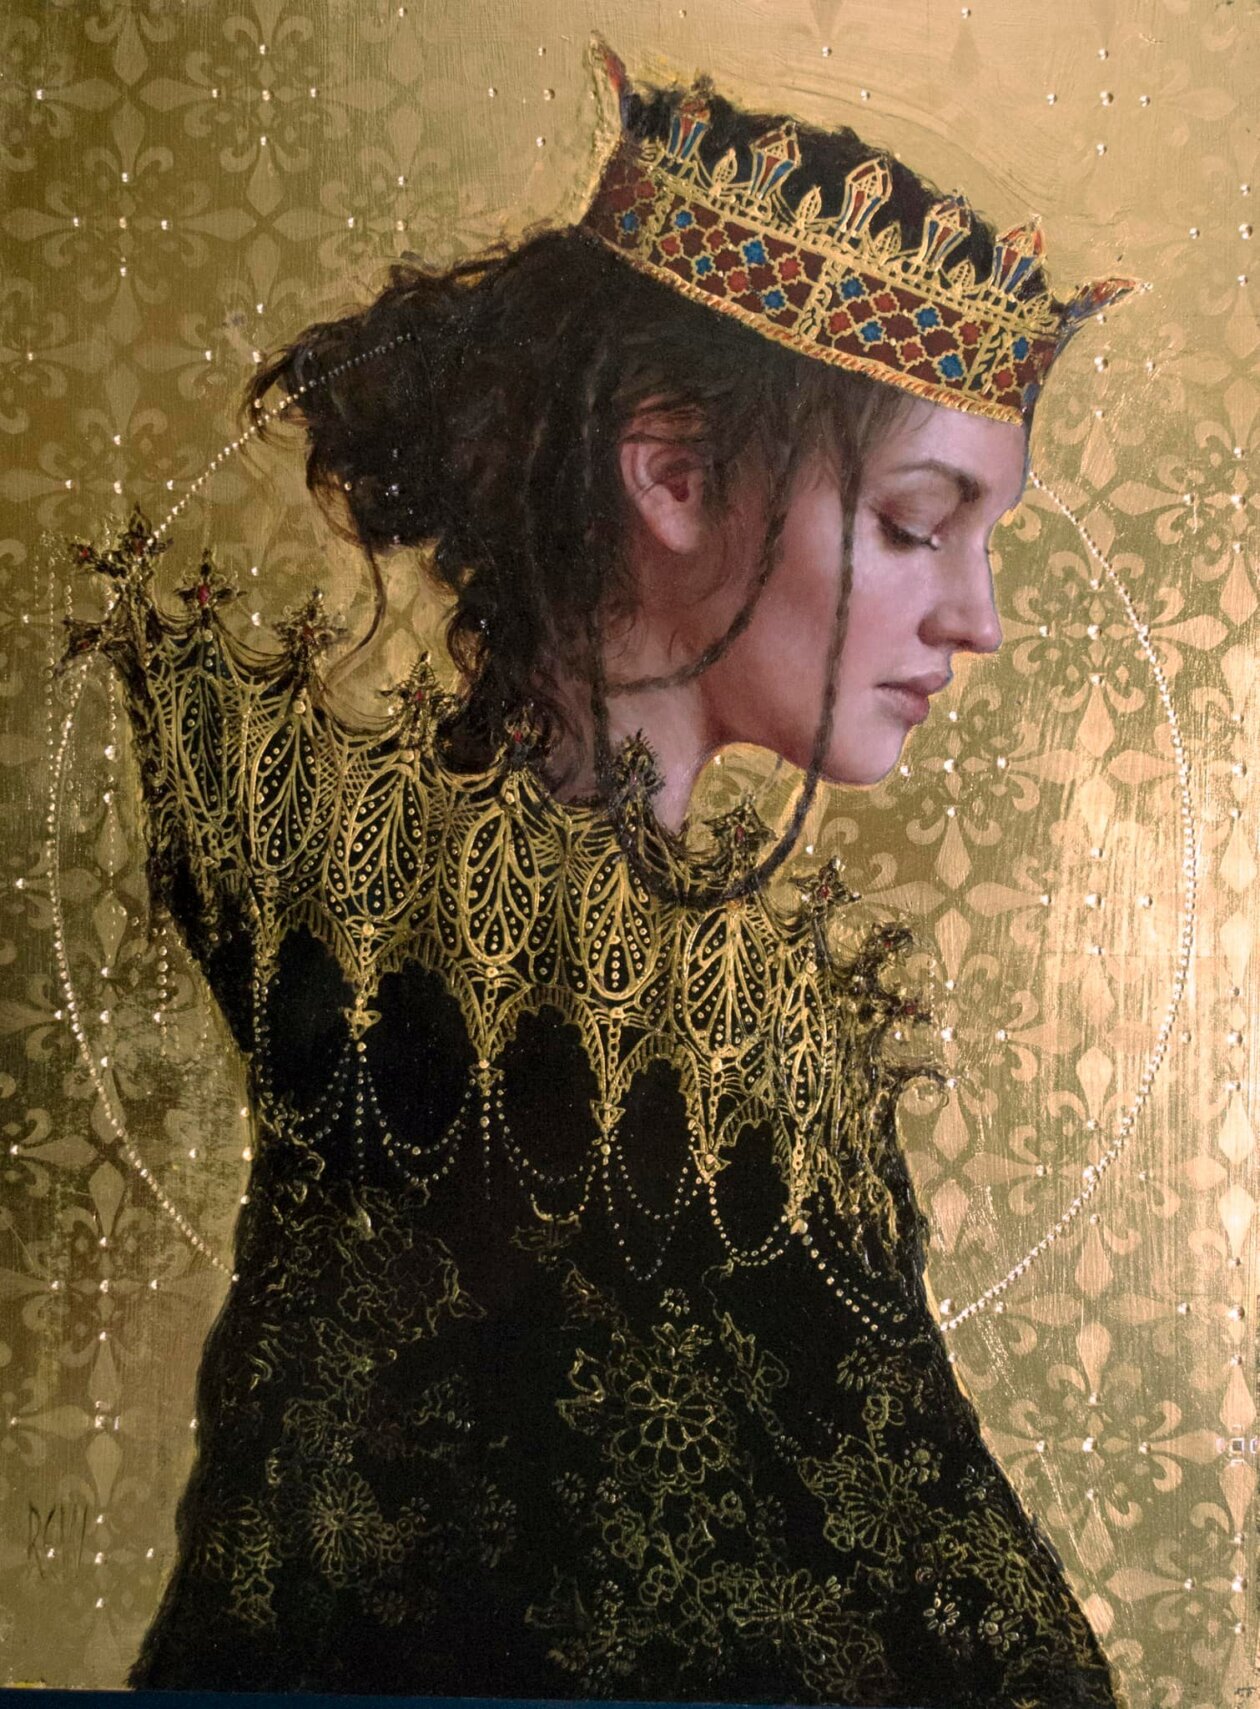 Realistic Figurative Paintings With Gold Ornaments By Stephanie Rew (21)